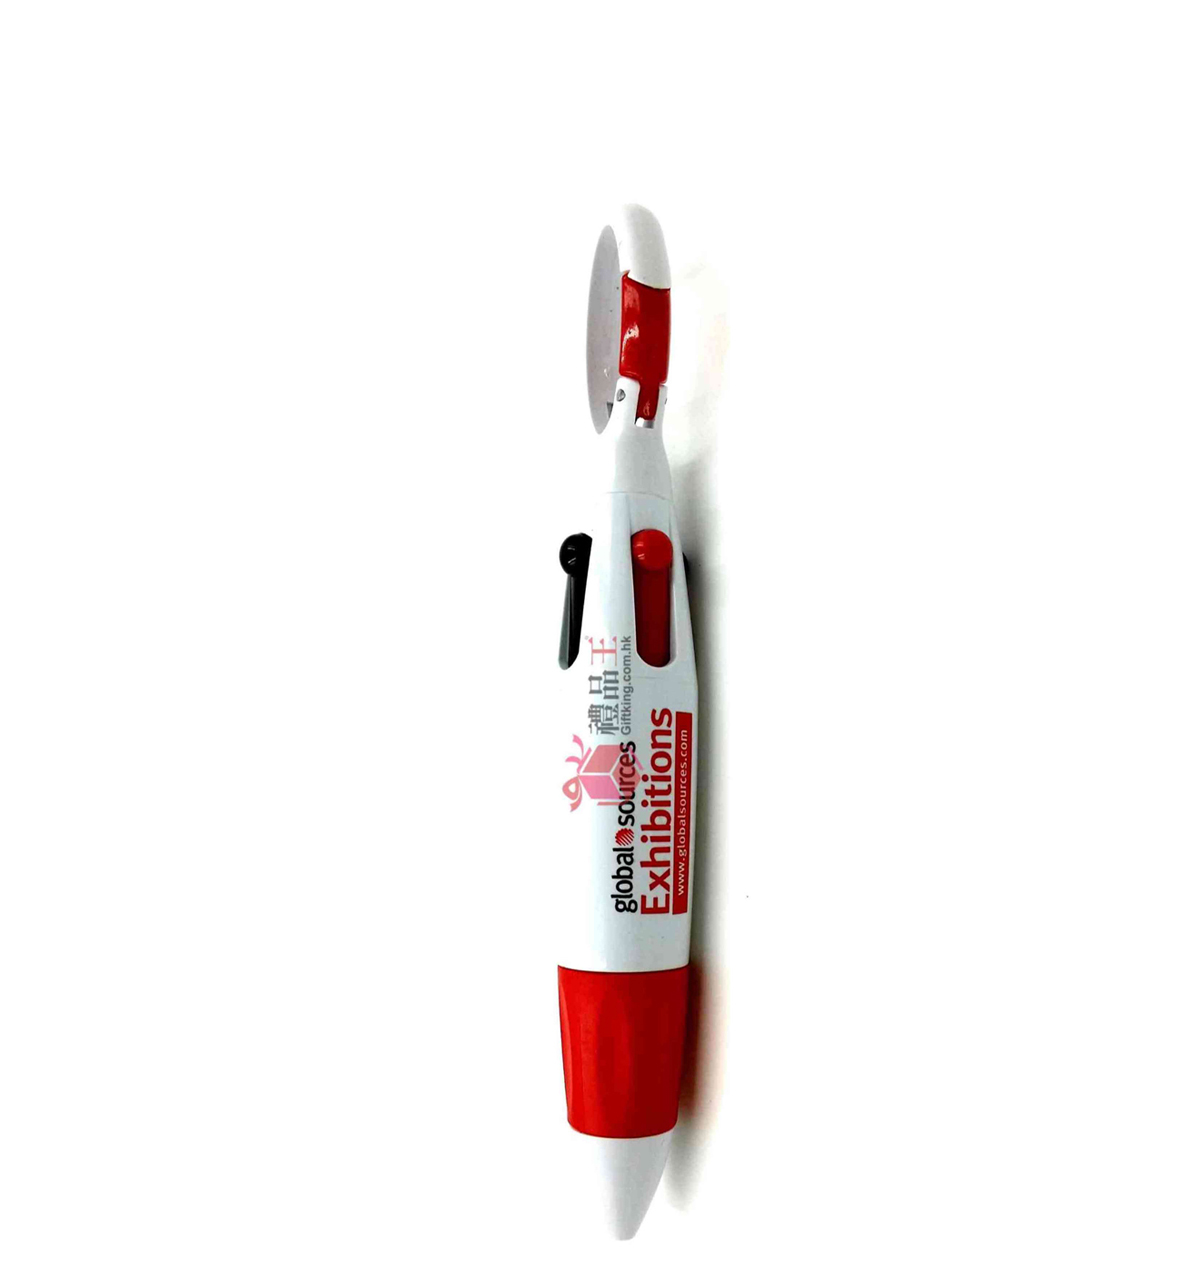 Global Sources 4 in 1 Show Pen (Stationery gift)